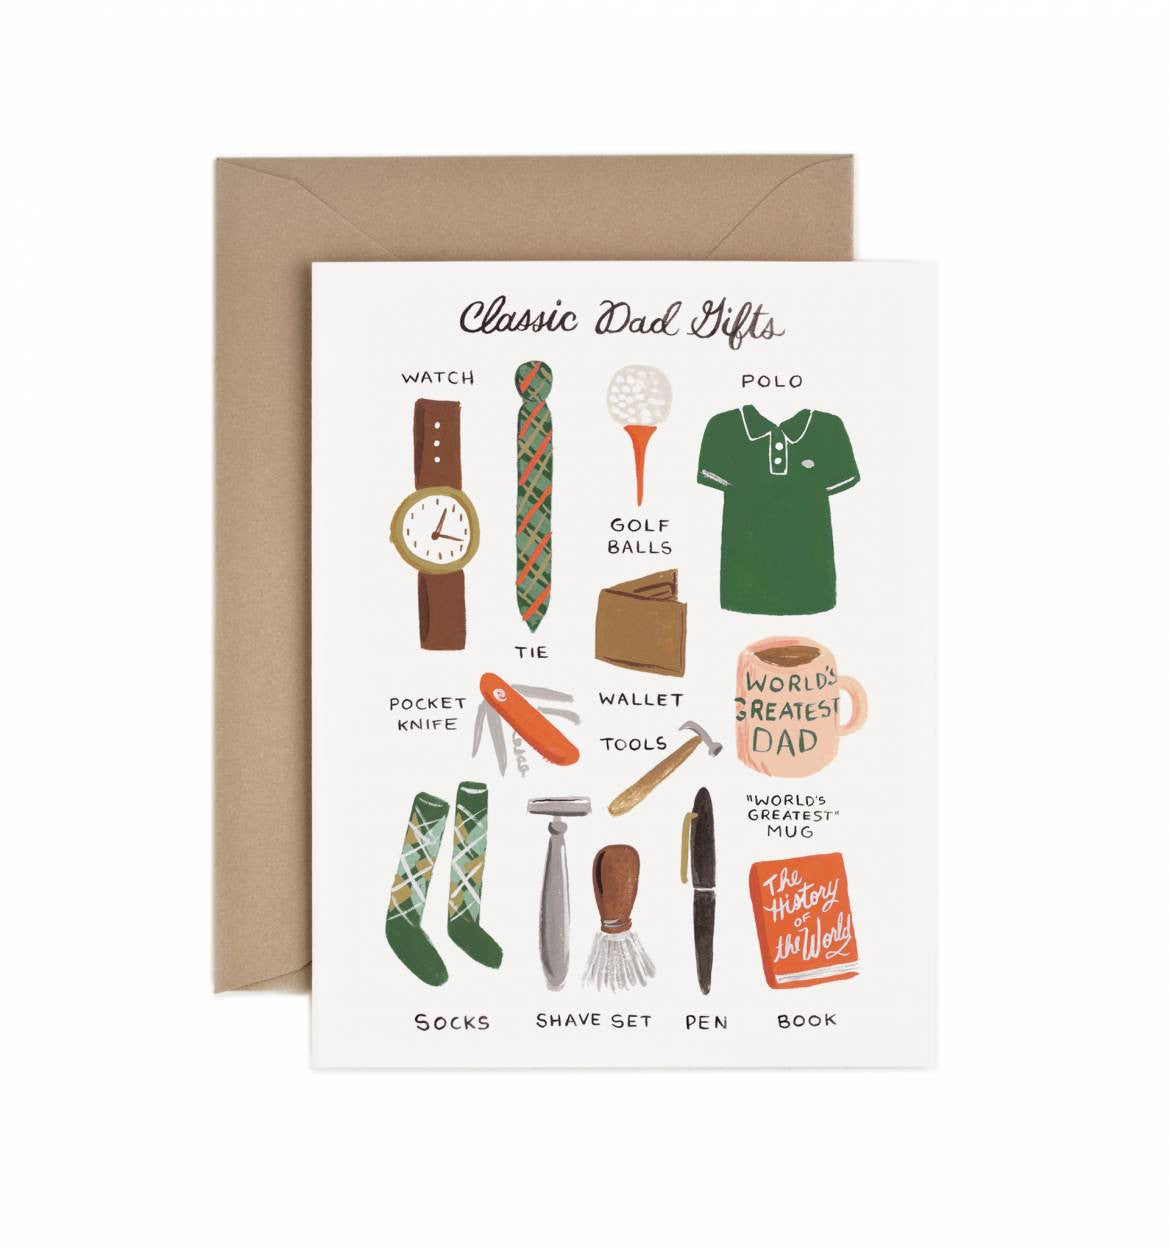 Classic Dad Gifts Card by Rifle Paper Co